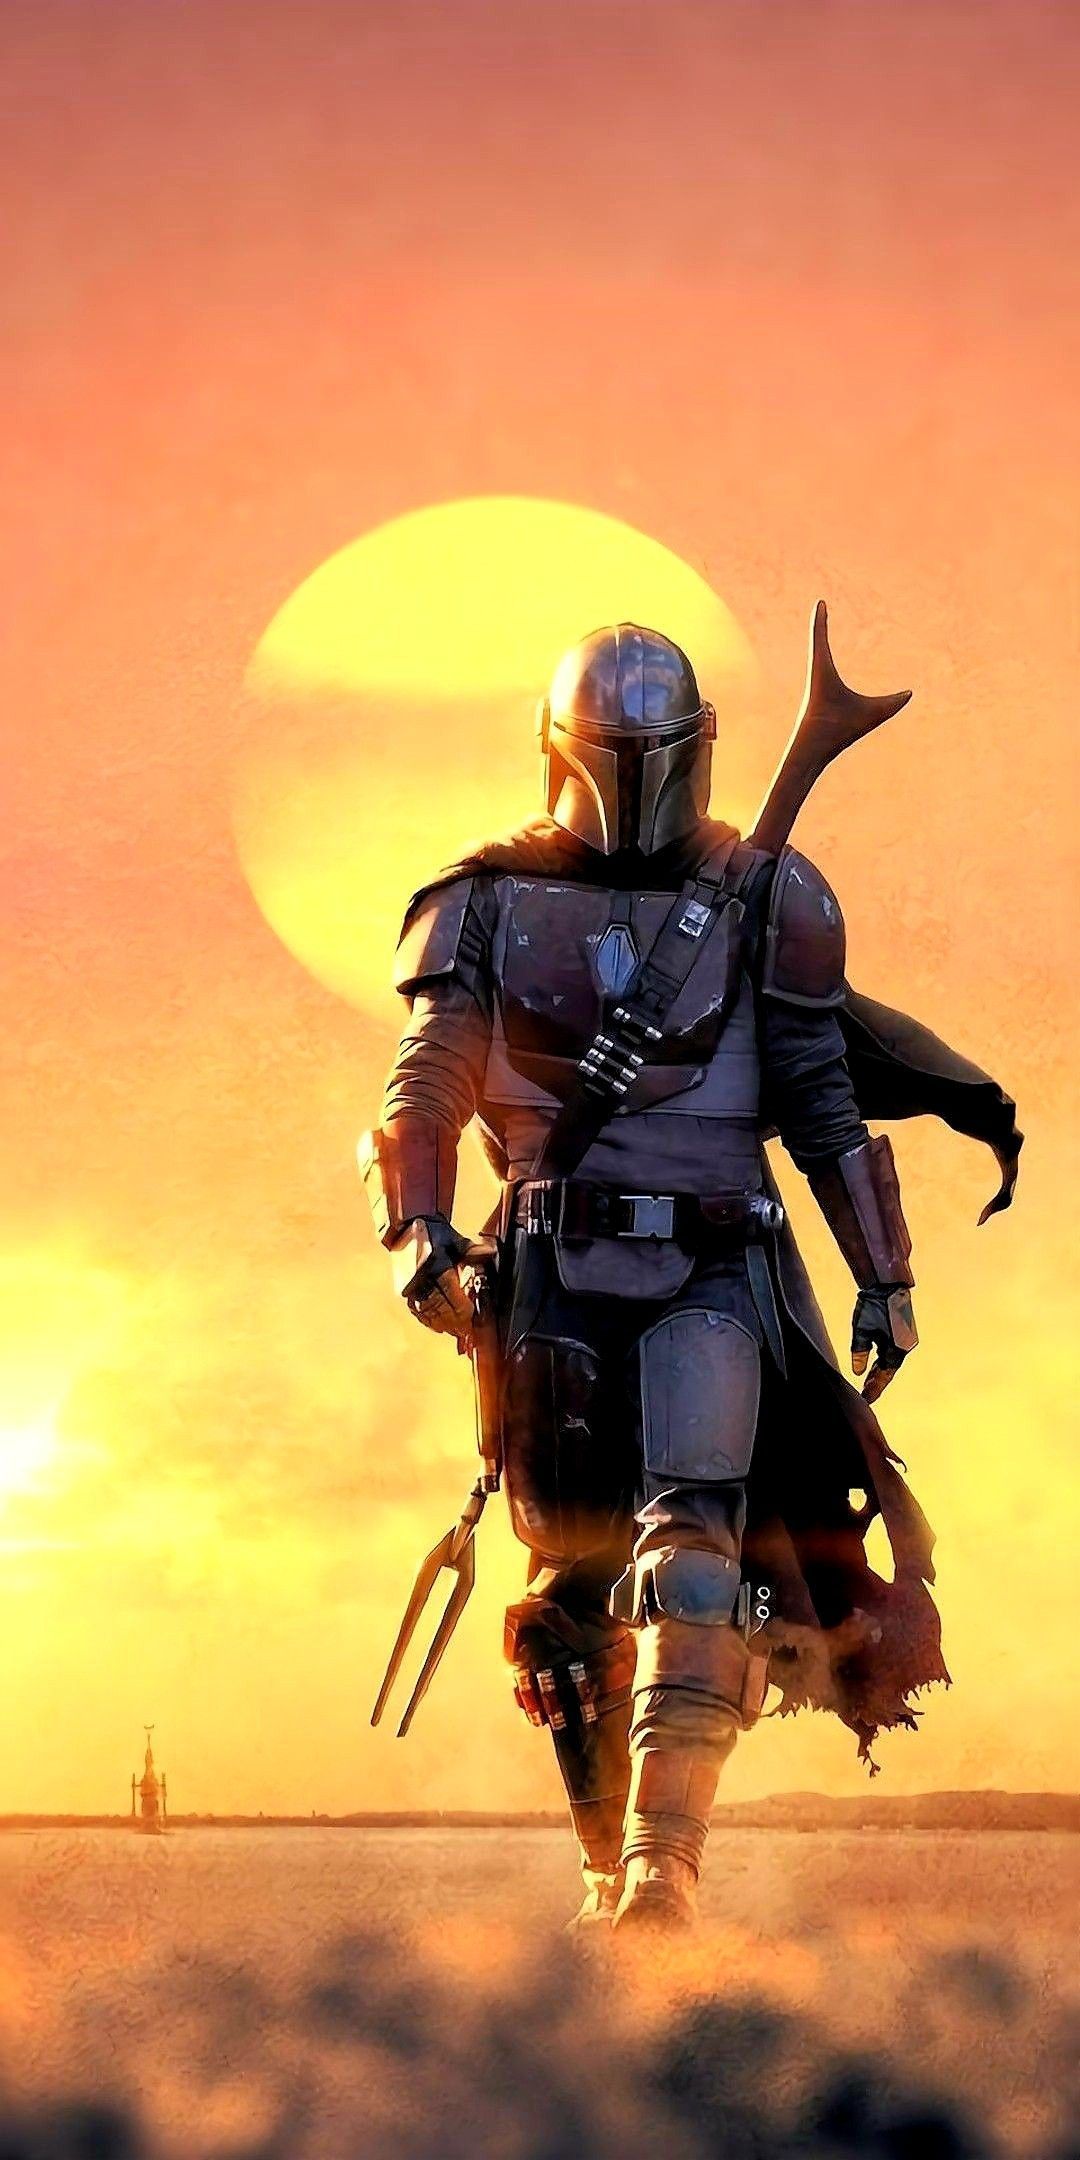 The mandalorian look amazing too bad in order to see it hou have to pay the disney monopoly. Star wars image, Star wars background, Star wars wallpaper